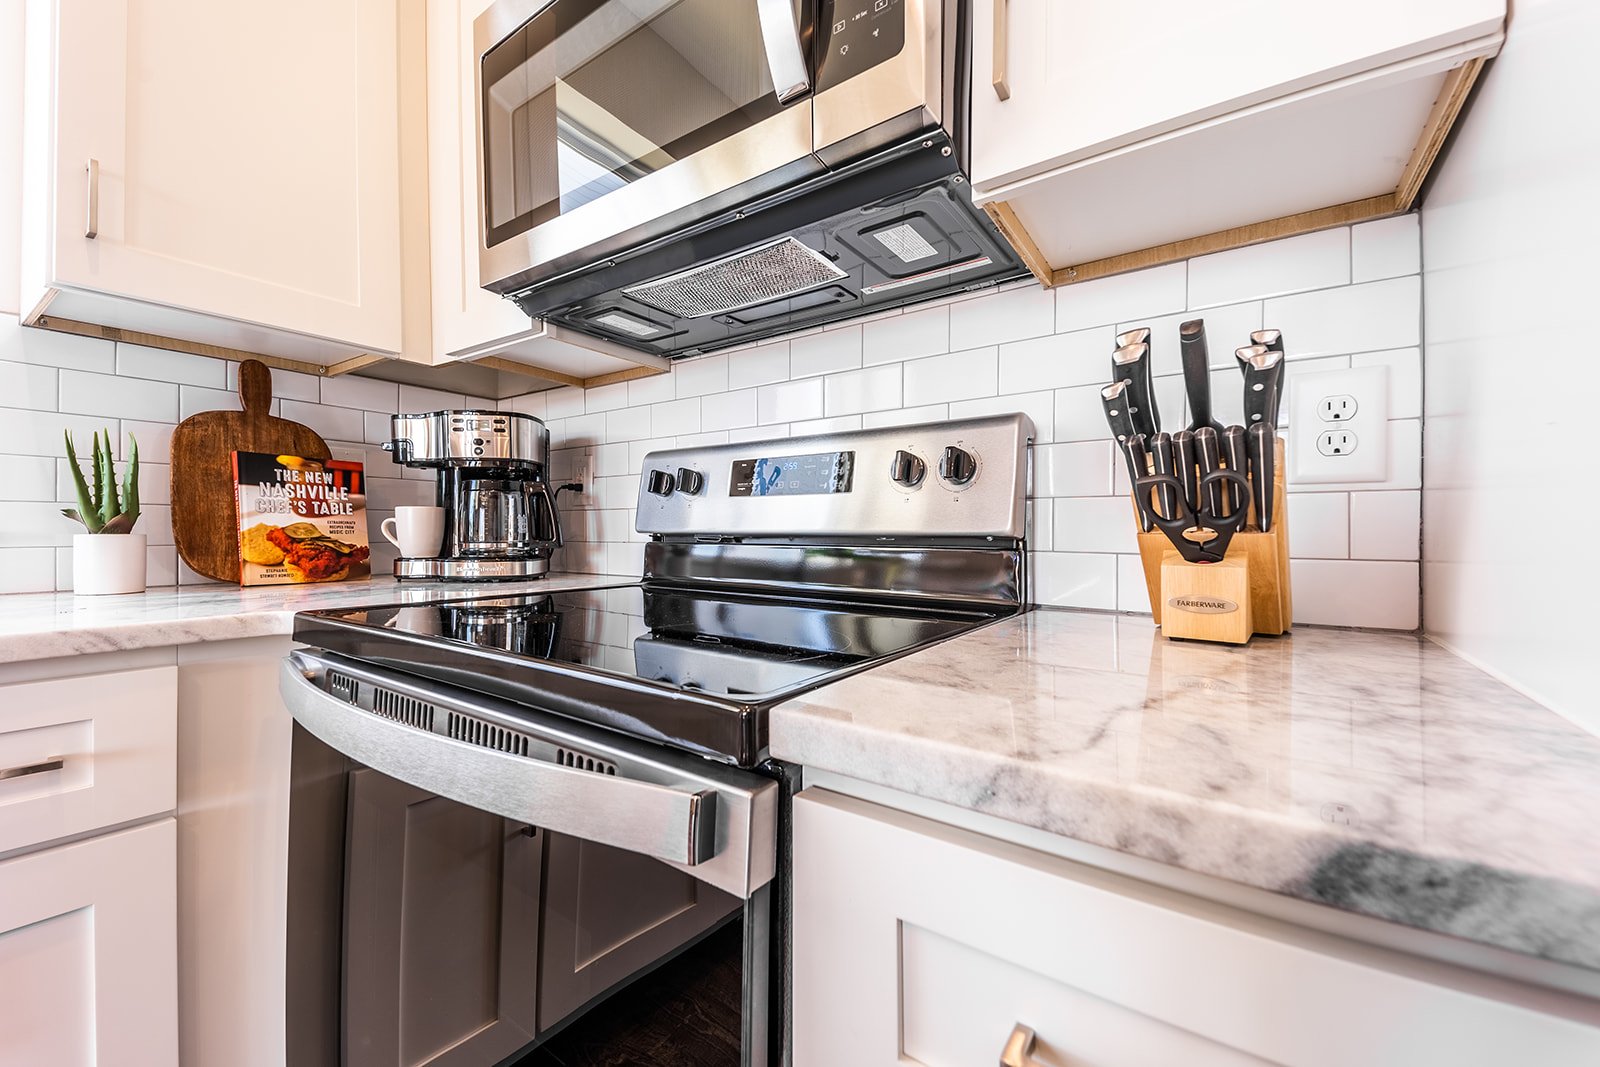 Unit 1 - Fully Equipped Kitchen stocked with your basic cooking essentials and stainless-steel appliances. (2nd Floor)